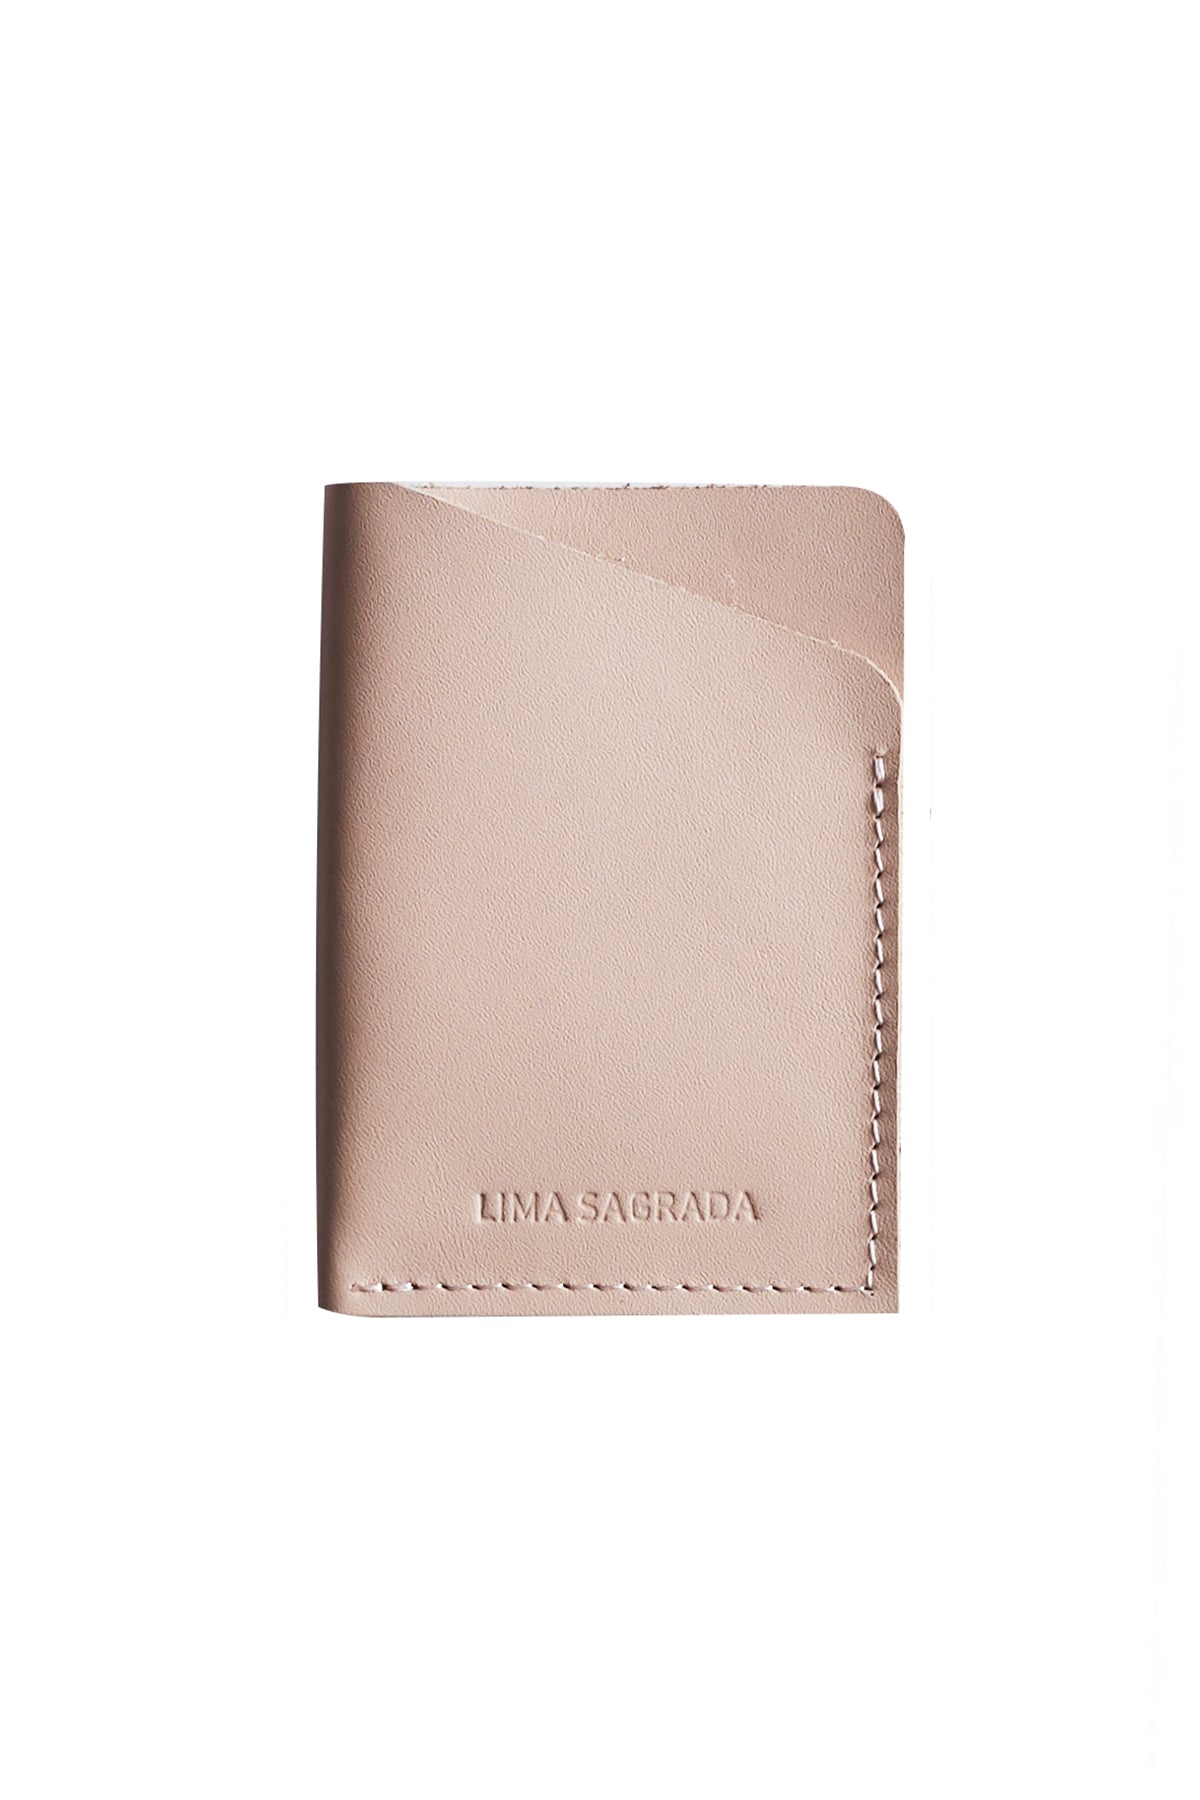   A pink SOFT LEATHER CARD HOLDER BY LIMA SAGRADA, designed by local artisans, featuring the word 